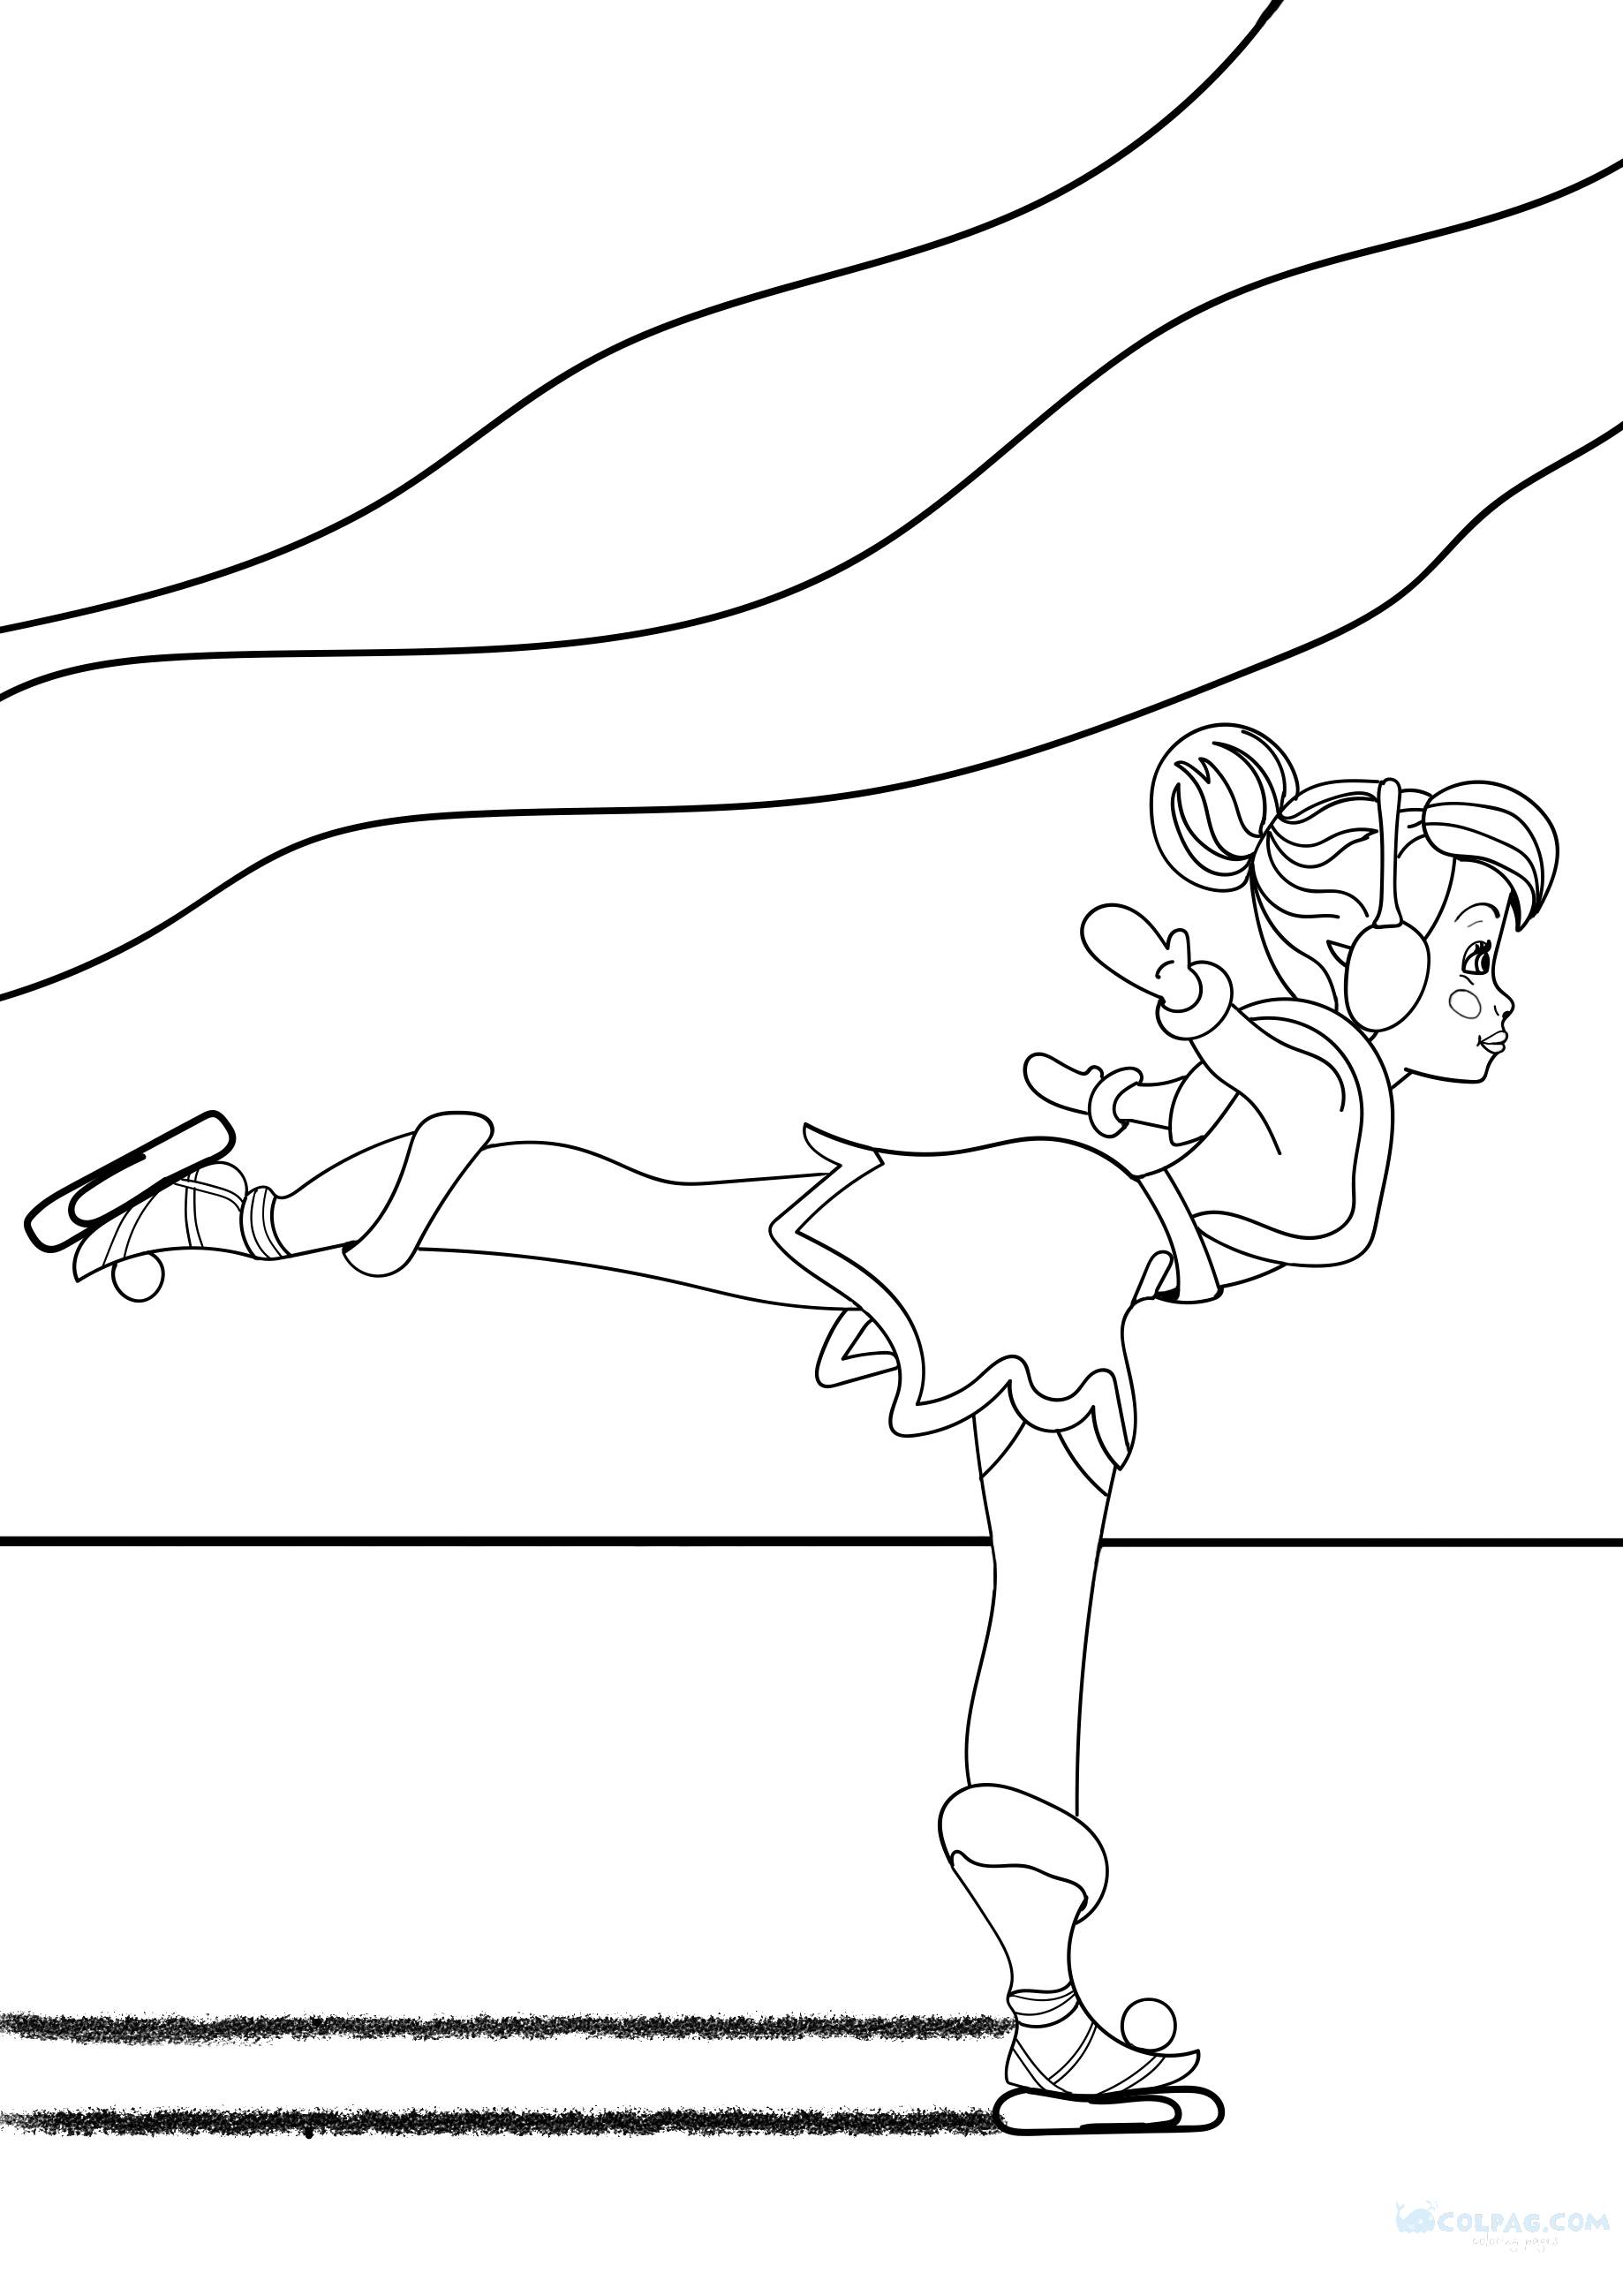 tinkerbell-coloring-page-colpag-com-6